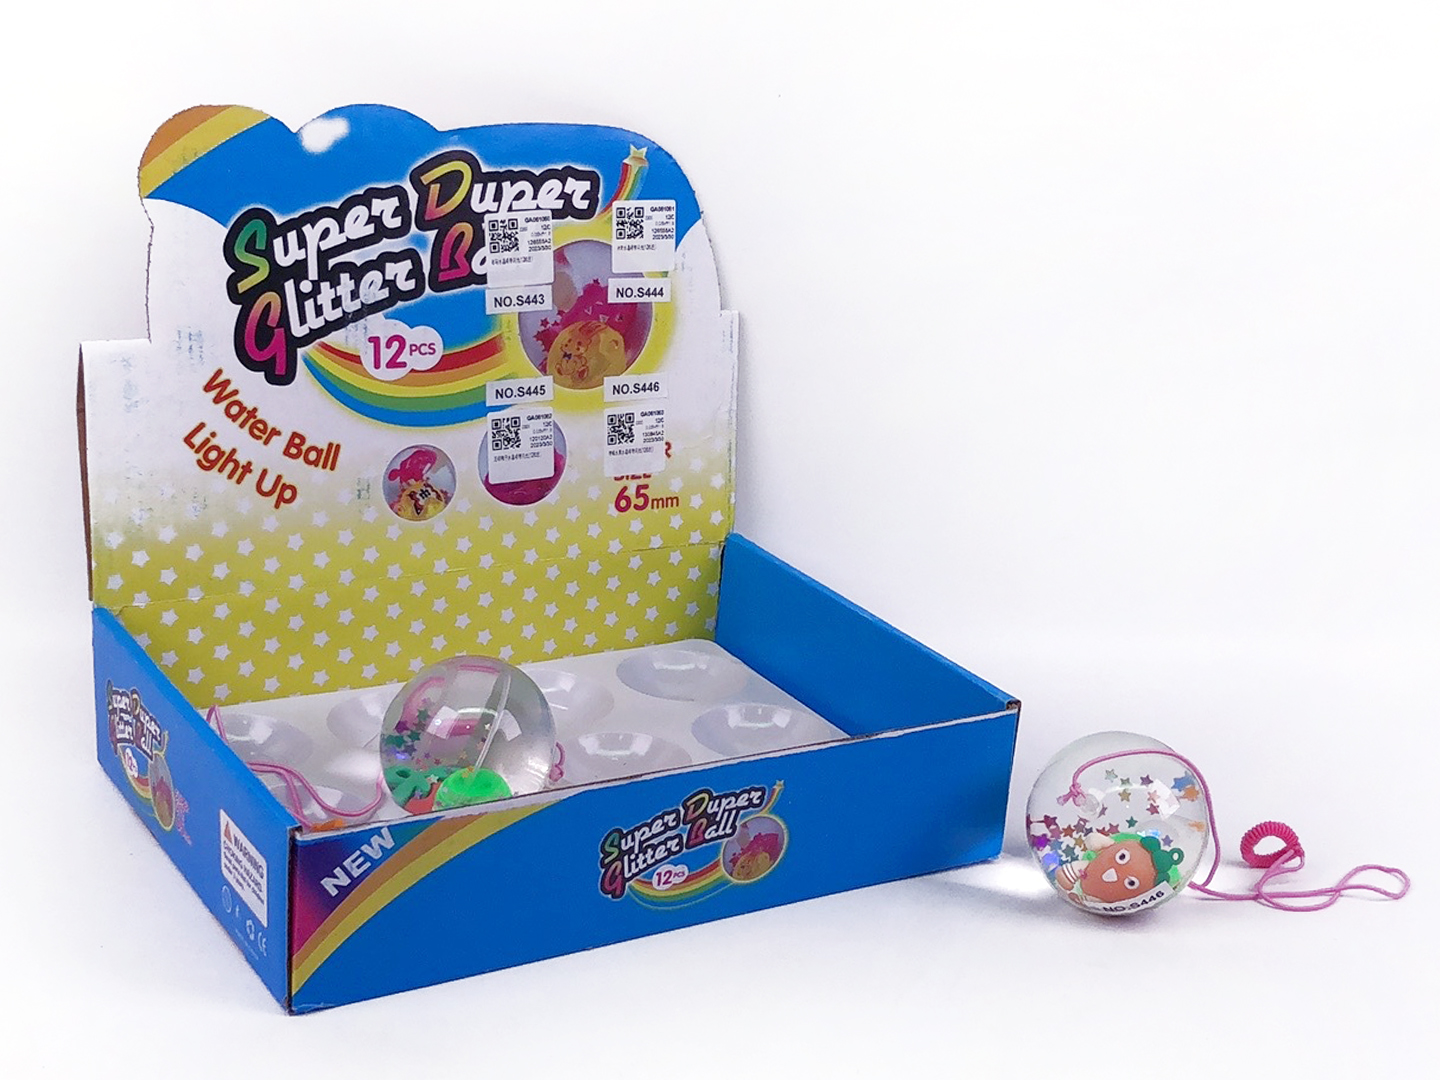 Crystal Ball W/L(12in1) toys